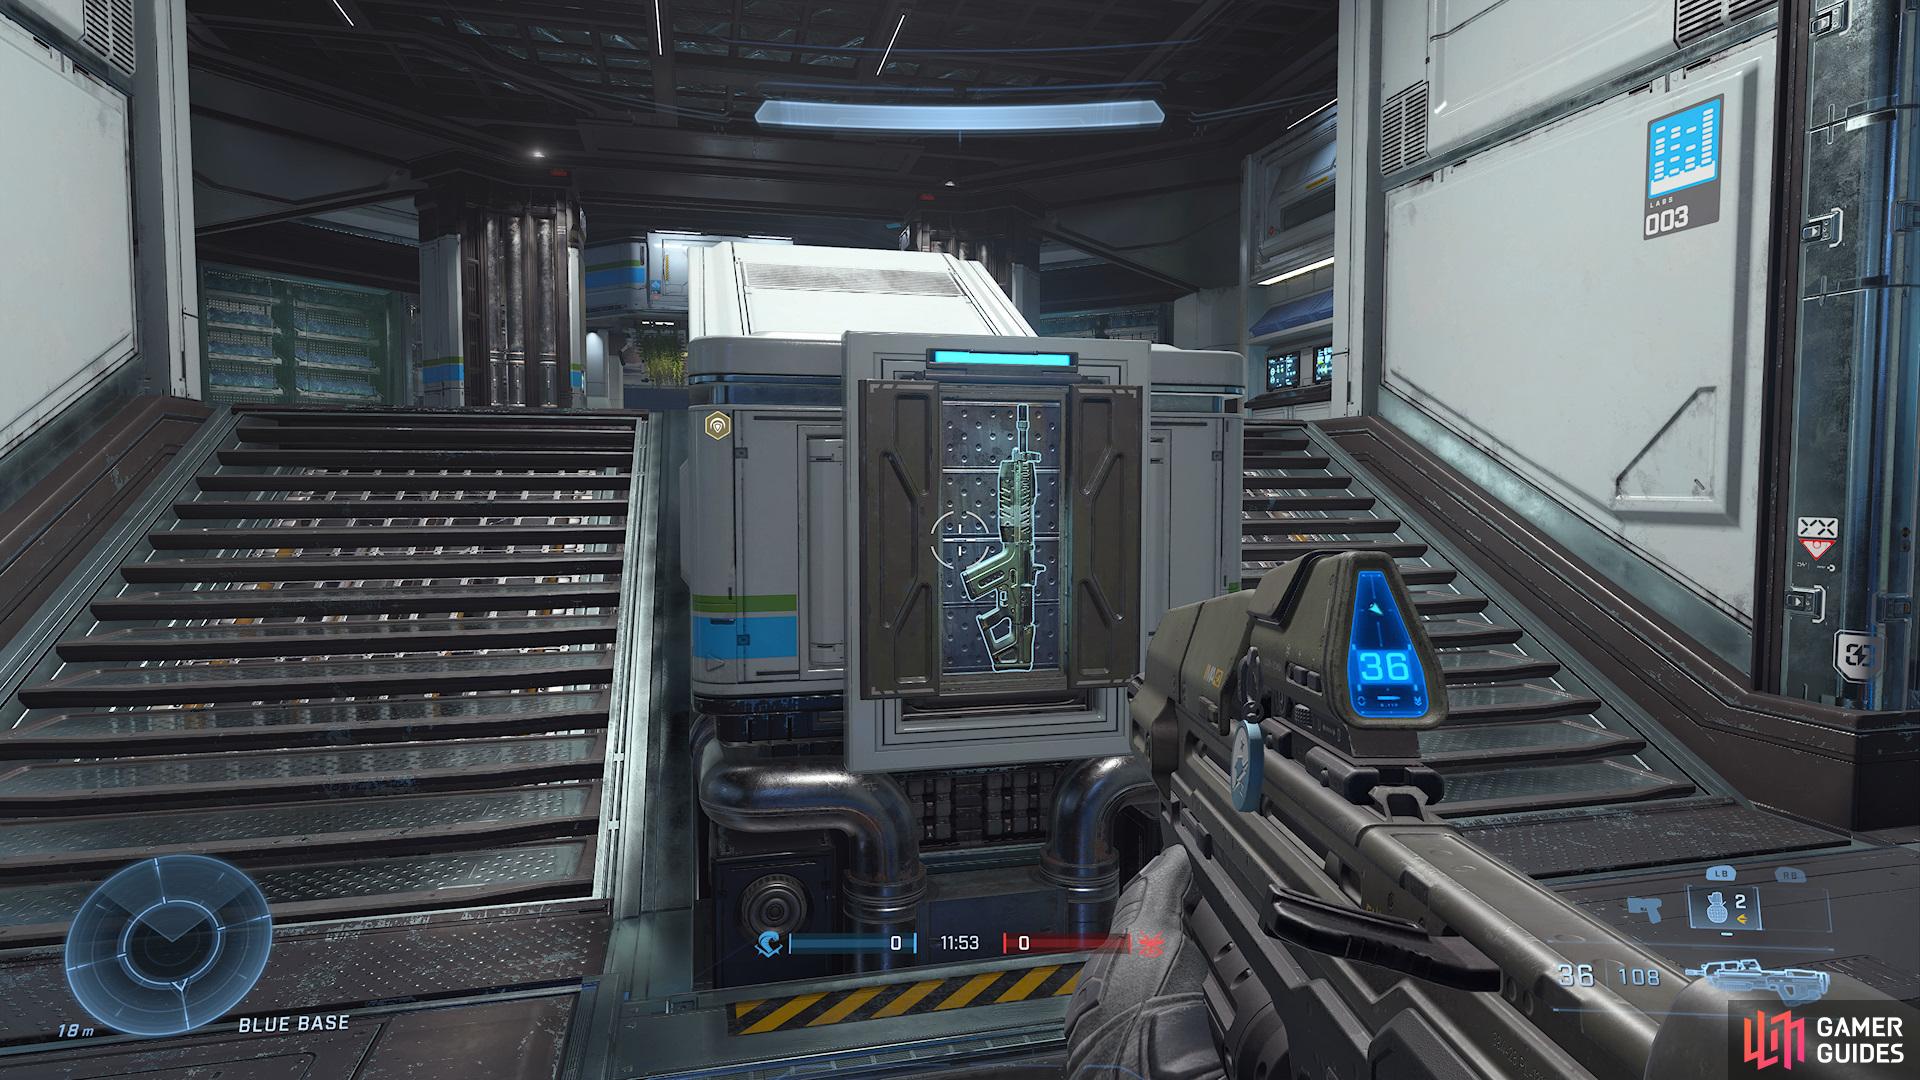 The Tactical Rifle can be found in the spawn of the Yellow and Blue Base.